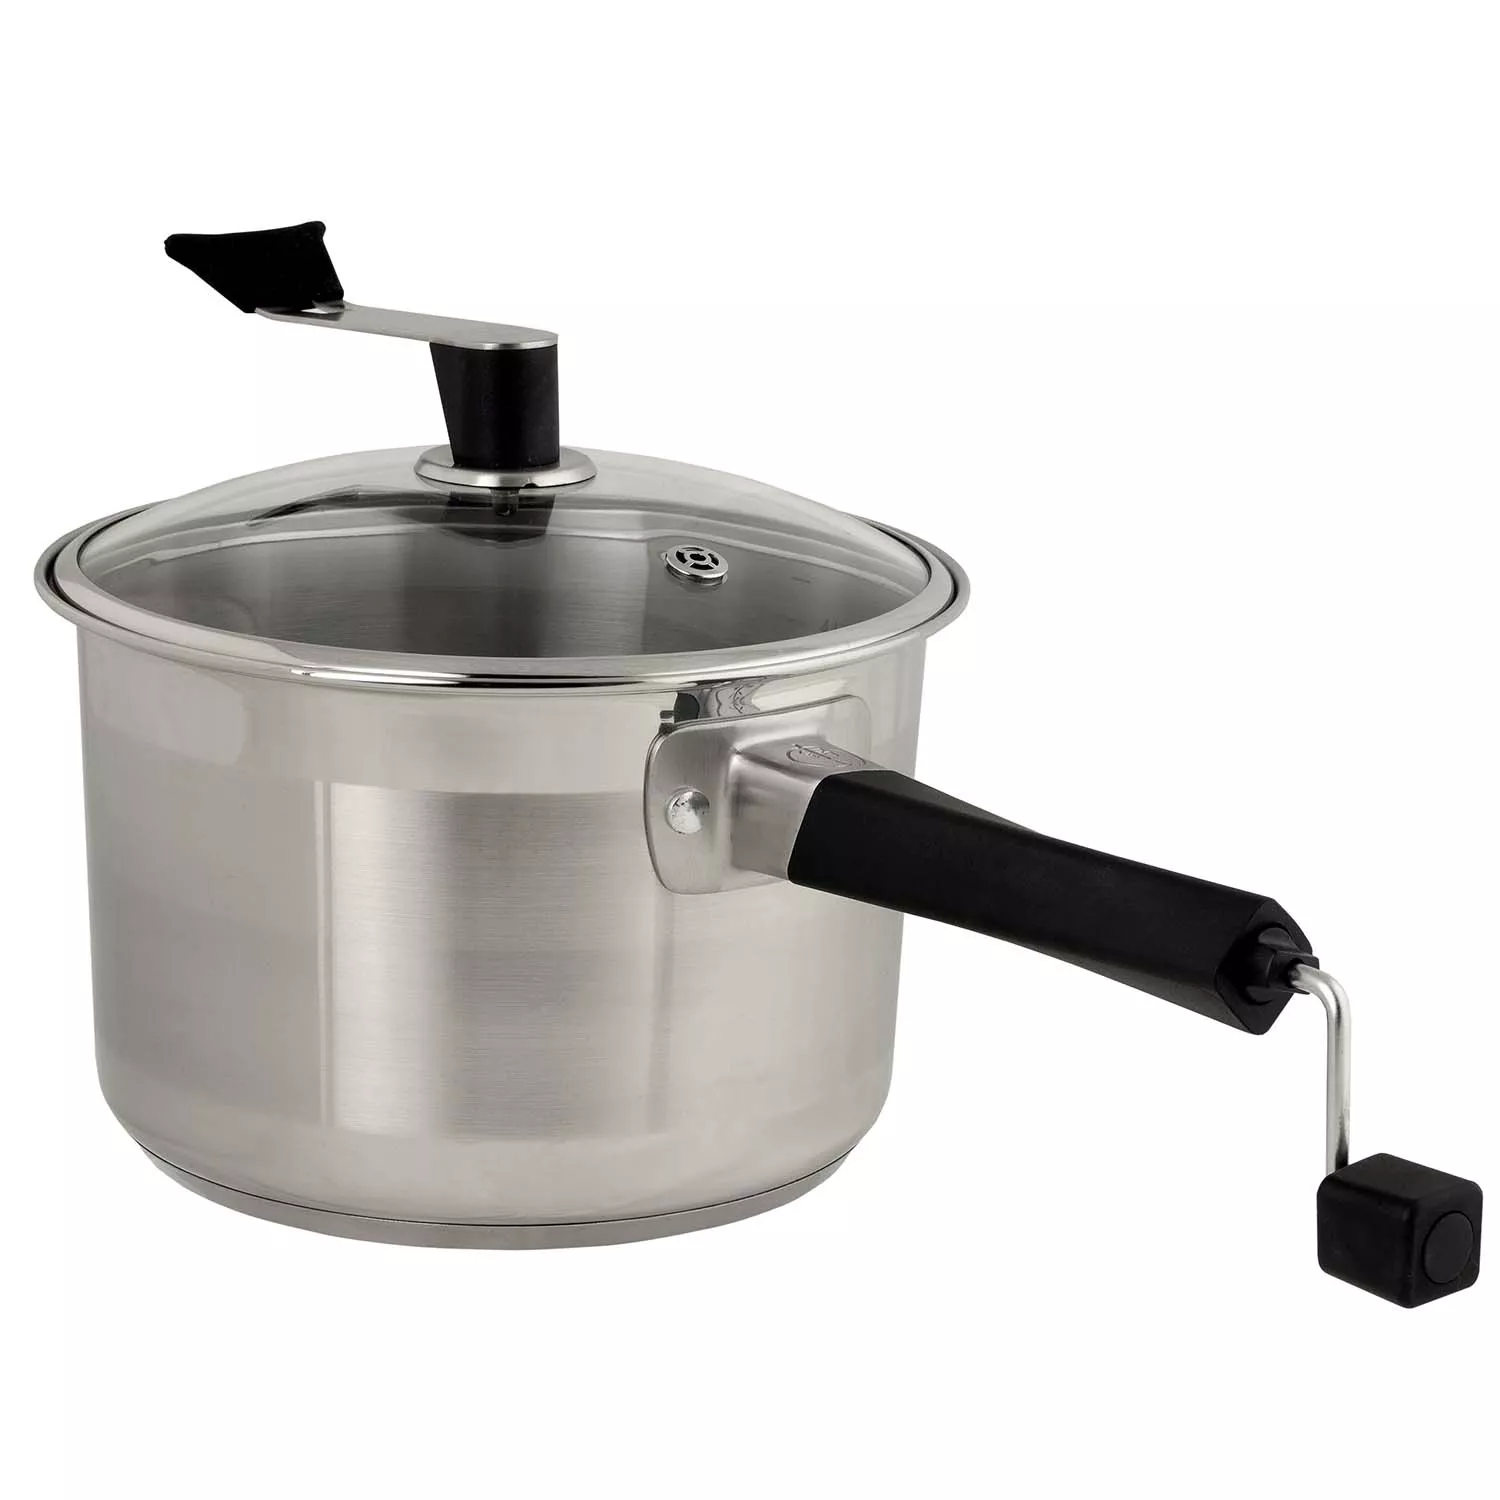 Whirley Stainless-Steel Induction Popcorn Maker, Cookware Accessories